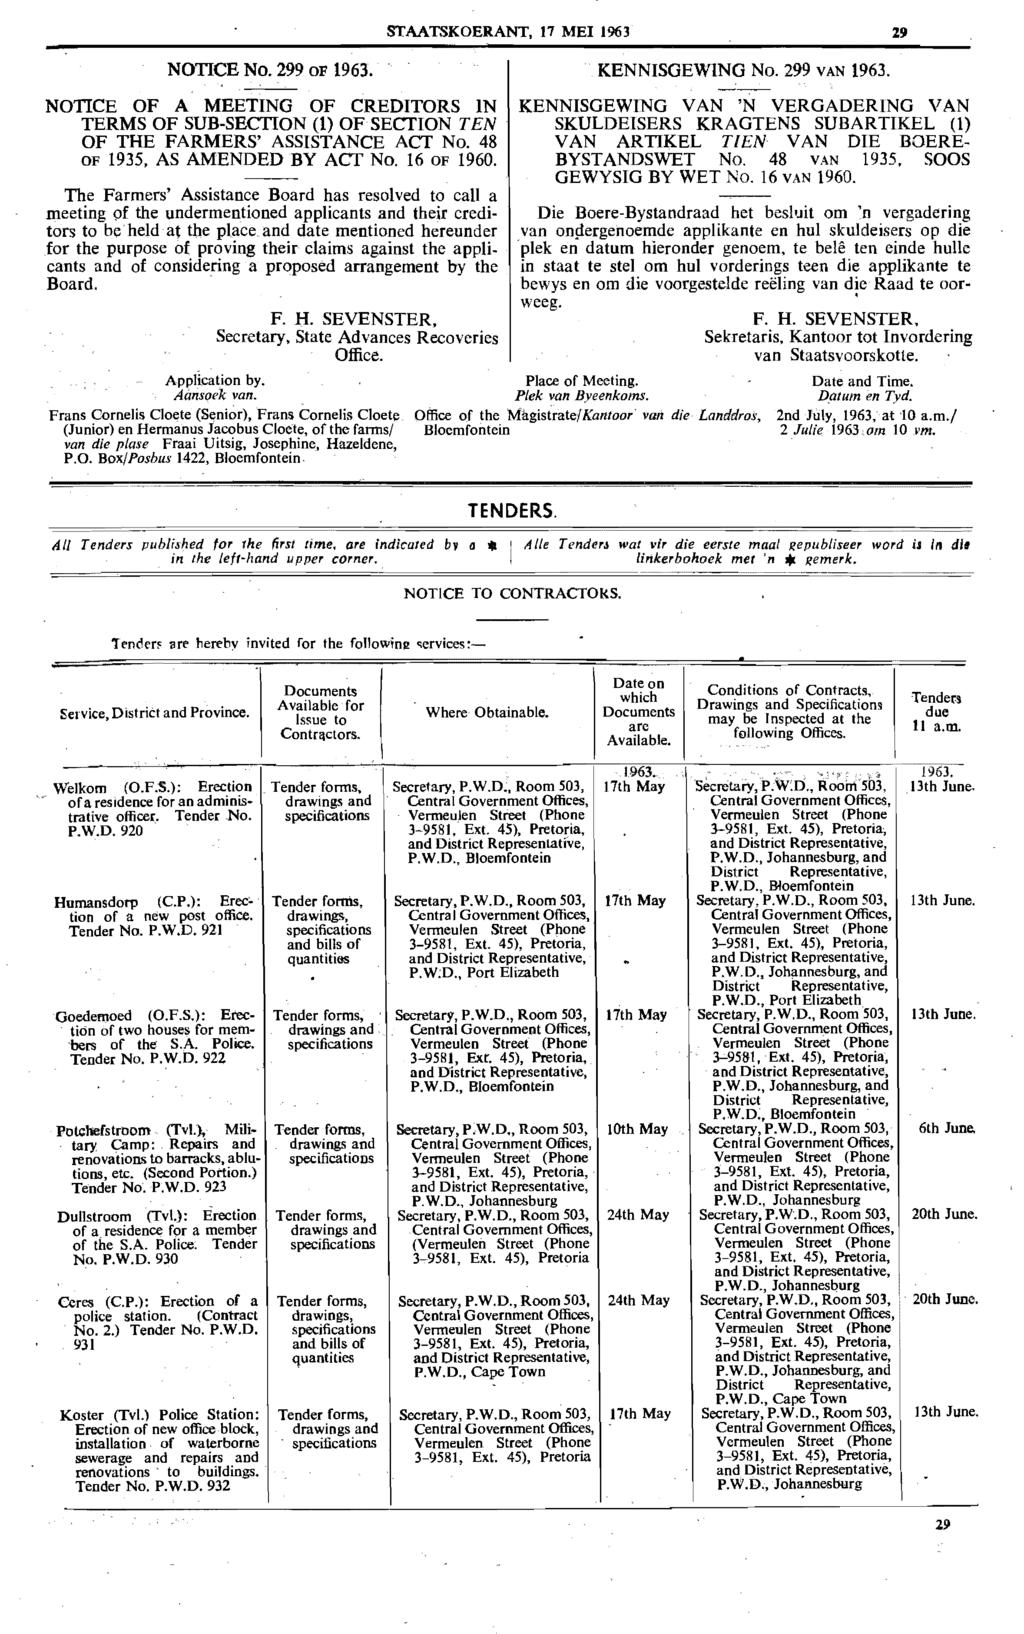 STAATSKOERANT, 17 MEl 1963 Z9 NOTICE No. 299 OF 1963. NOTICE OF A MEETING OF CREDITORS IN TERMS OF SUB-SECTION (1) OF SECTION TEN OF THE FARMERS' ASSISTANCE ACT No. 48 OF 1935, AS AMENDED BY ACT No.